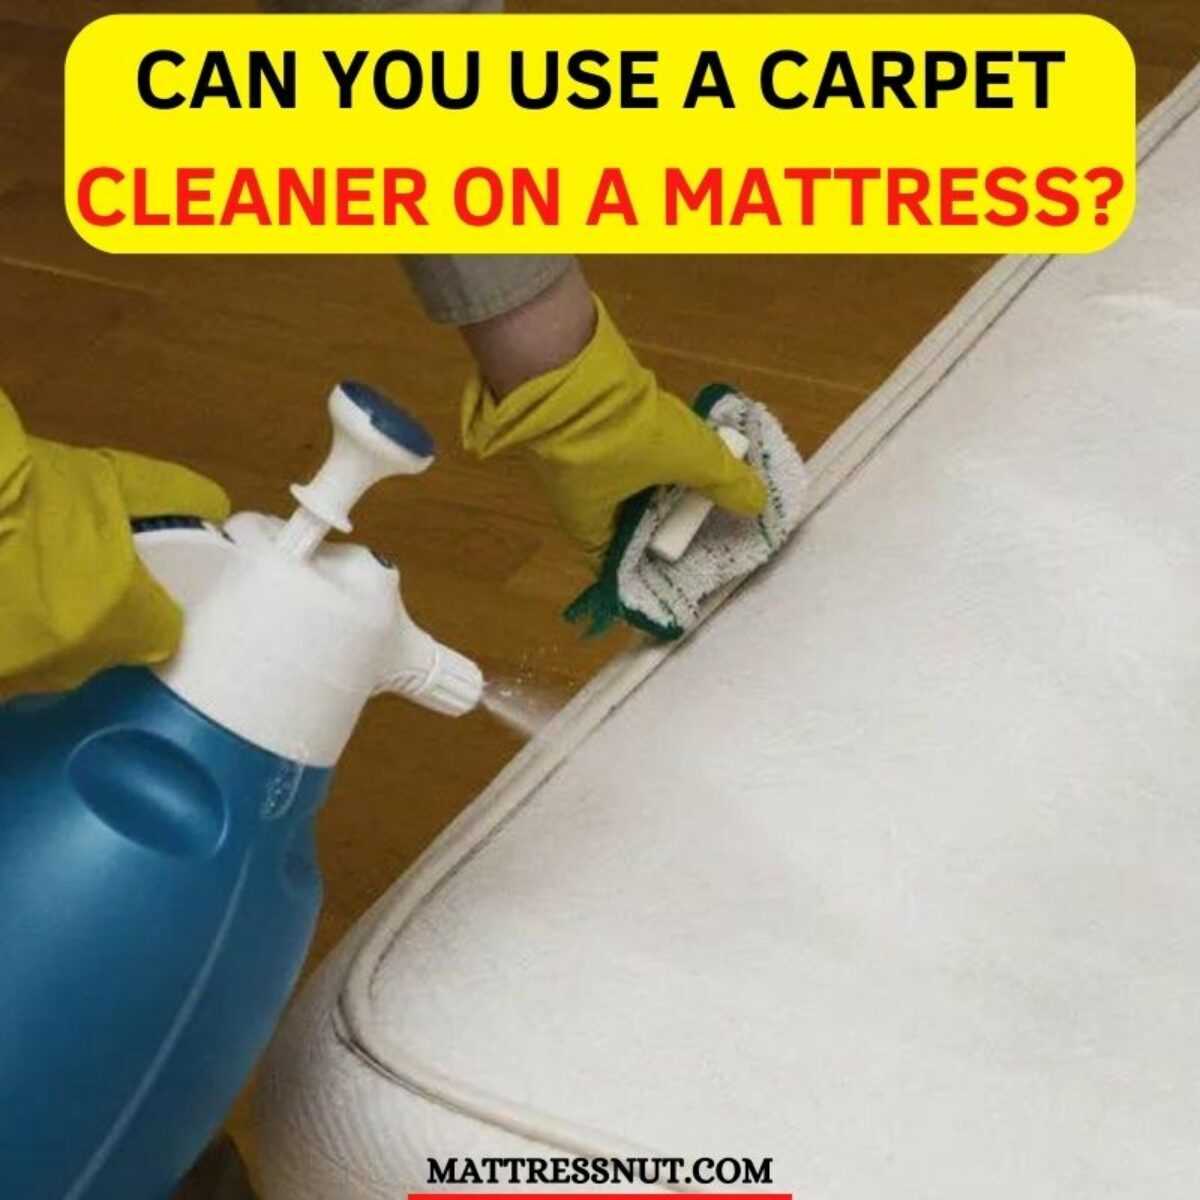 Can You Use a Carpet Cleaner on a Mattress?